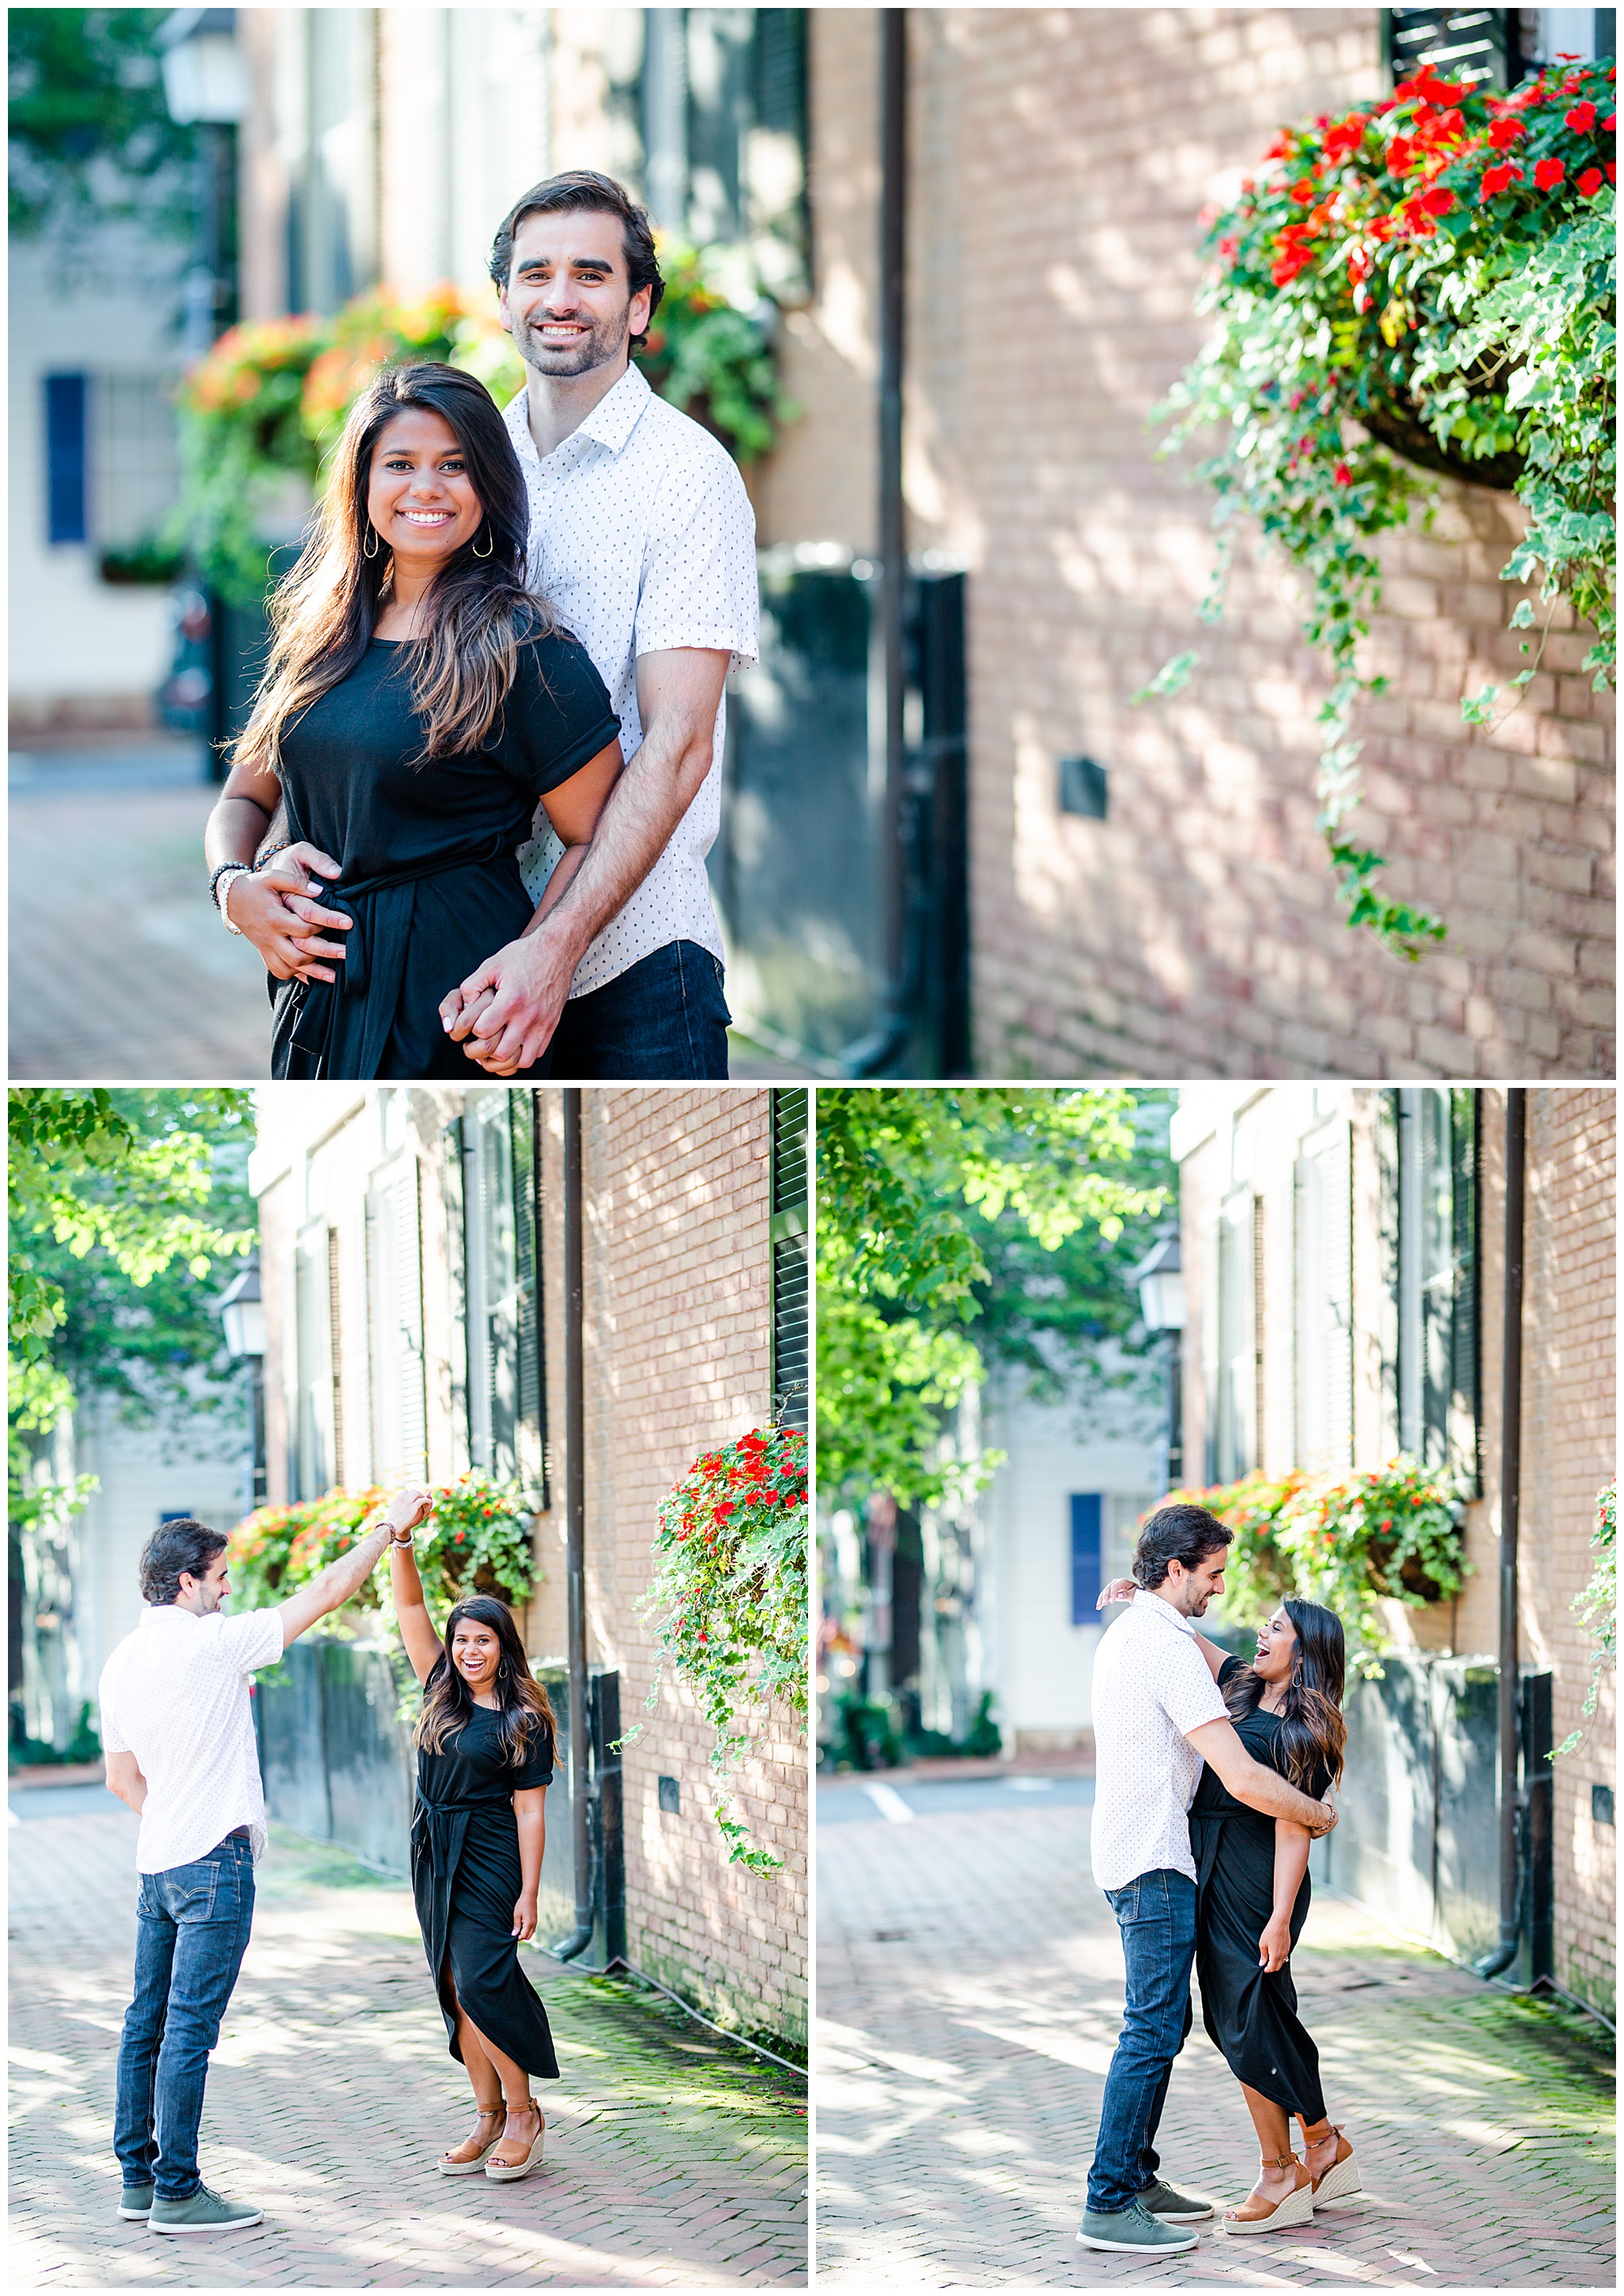 Old Town Alexandria engagement photos, Alexandria engagement photos, Old Town Alexandria photos, Old Town Alexandria, Alexandria engagement photos, Alexandria Virginia, classic engagement photos, historic town engagement photos, engagement photos, Rachel E.H. Photography, couple dancing